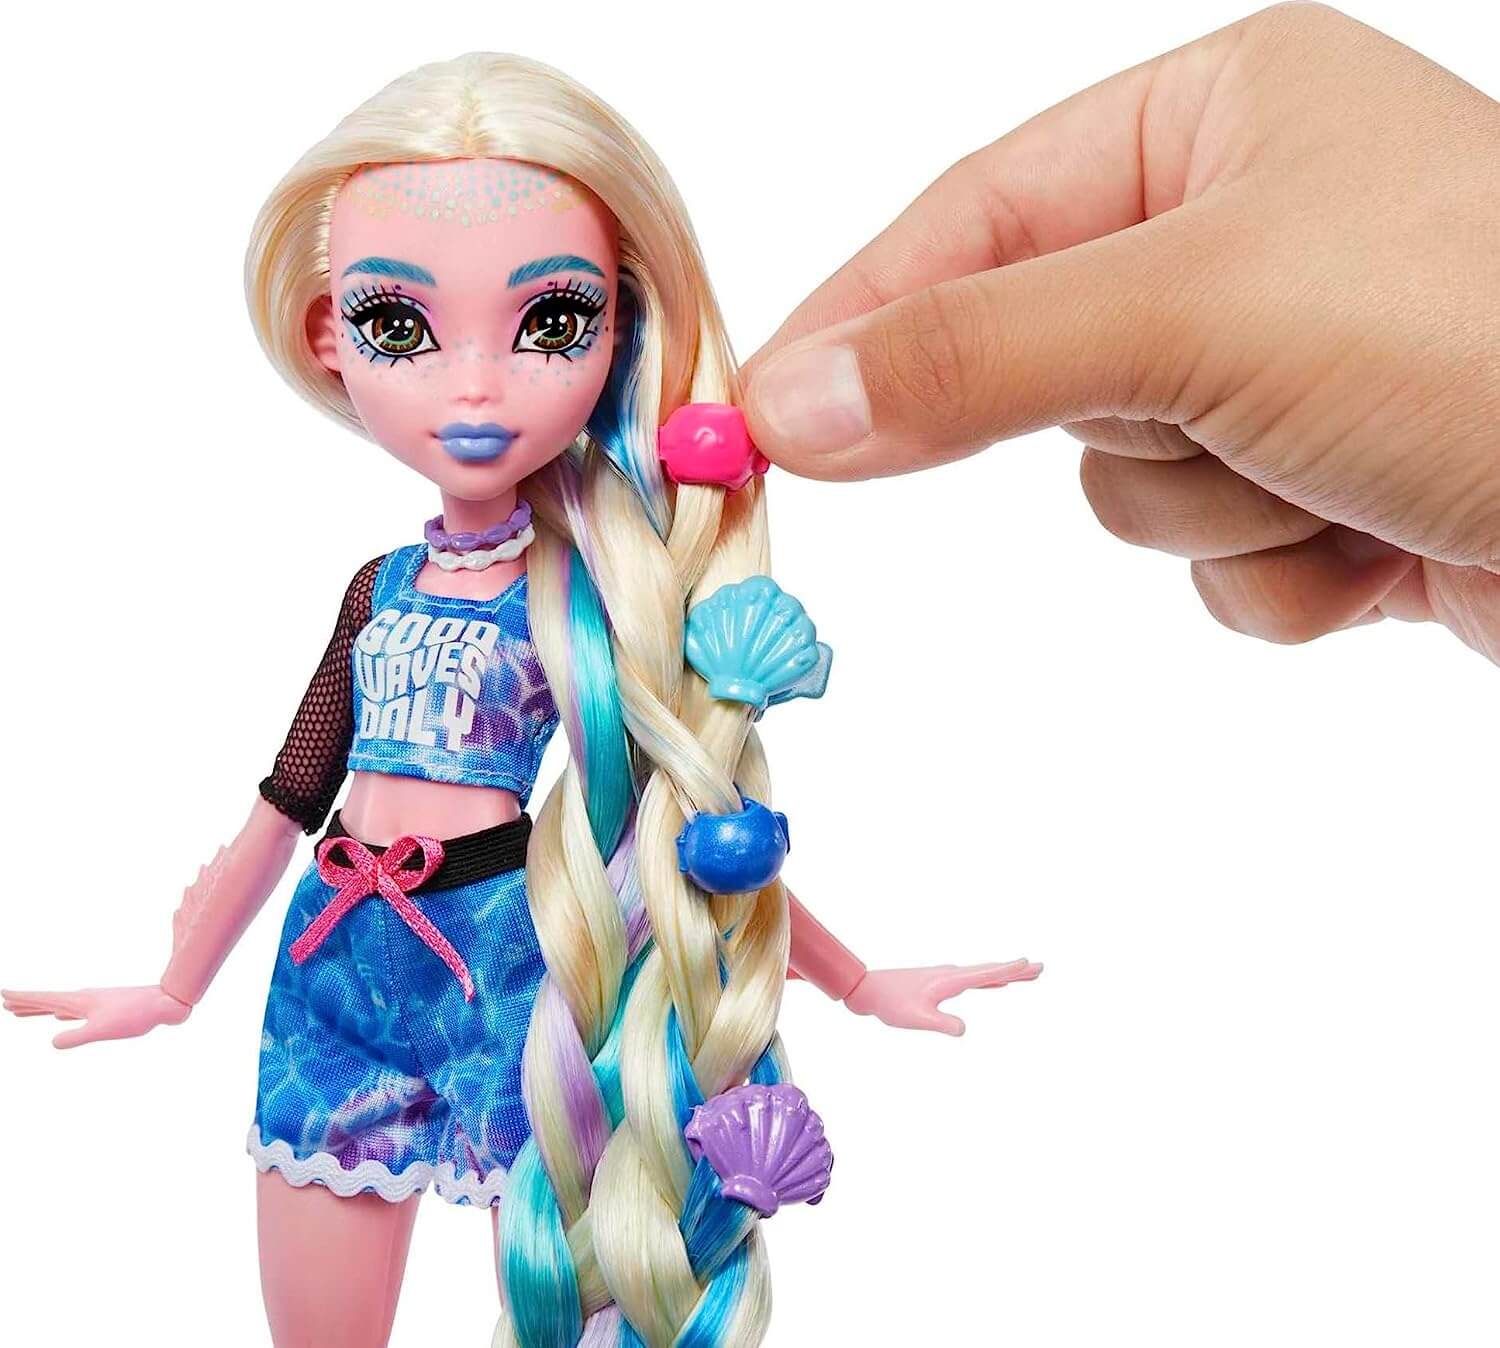 Doll shown with hand putting beads in dolls hair from the Monster High Lagoona Blue Spa Day Doll and Accessories